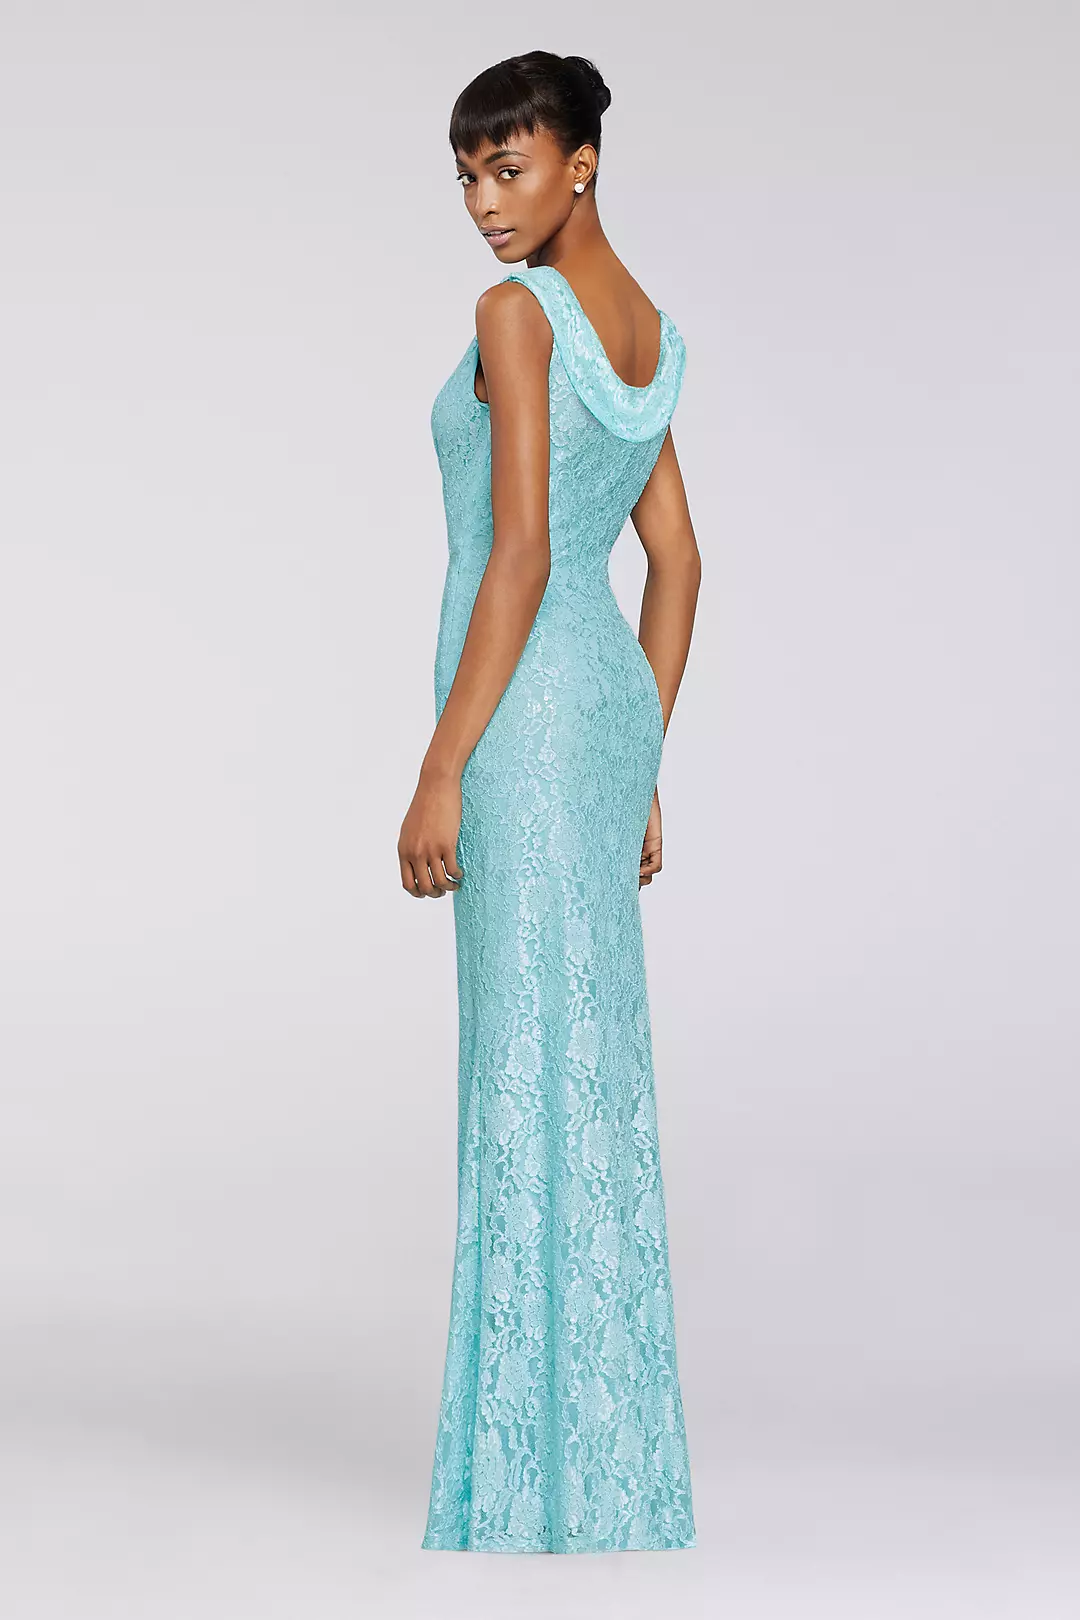 Sleeveless Allover Sequined Lace Dress Image 2